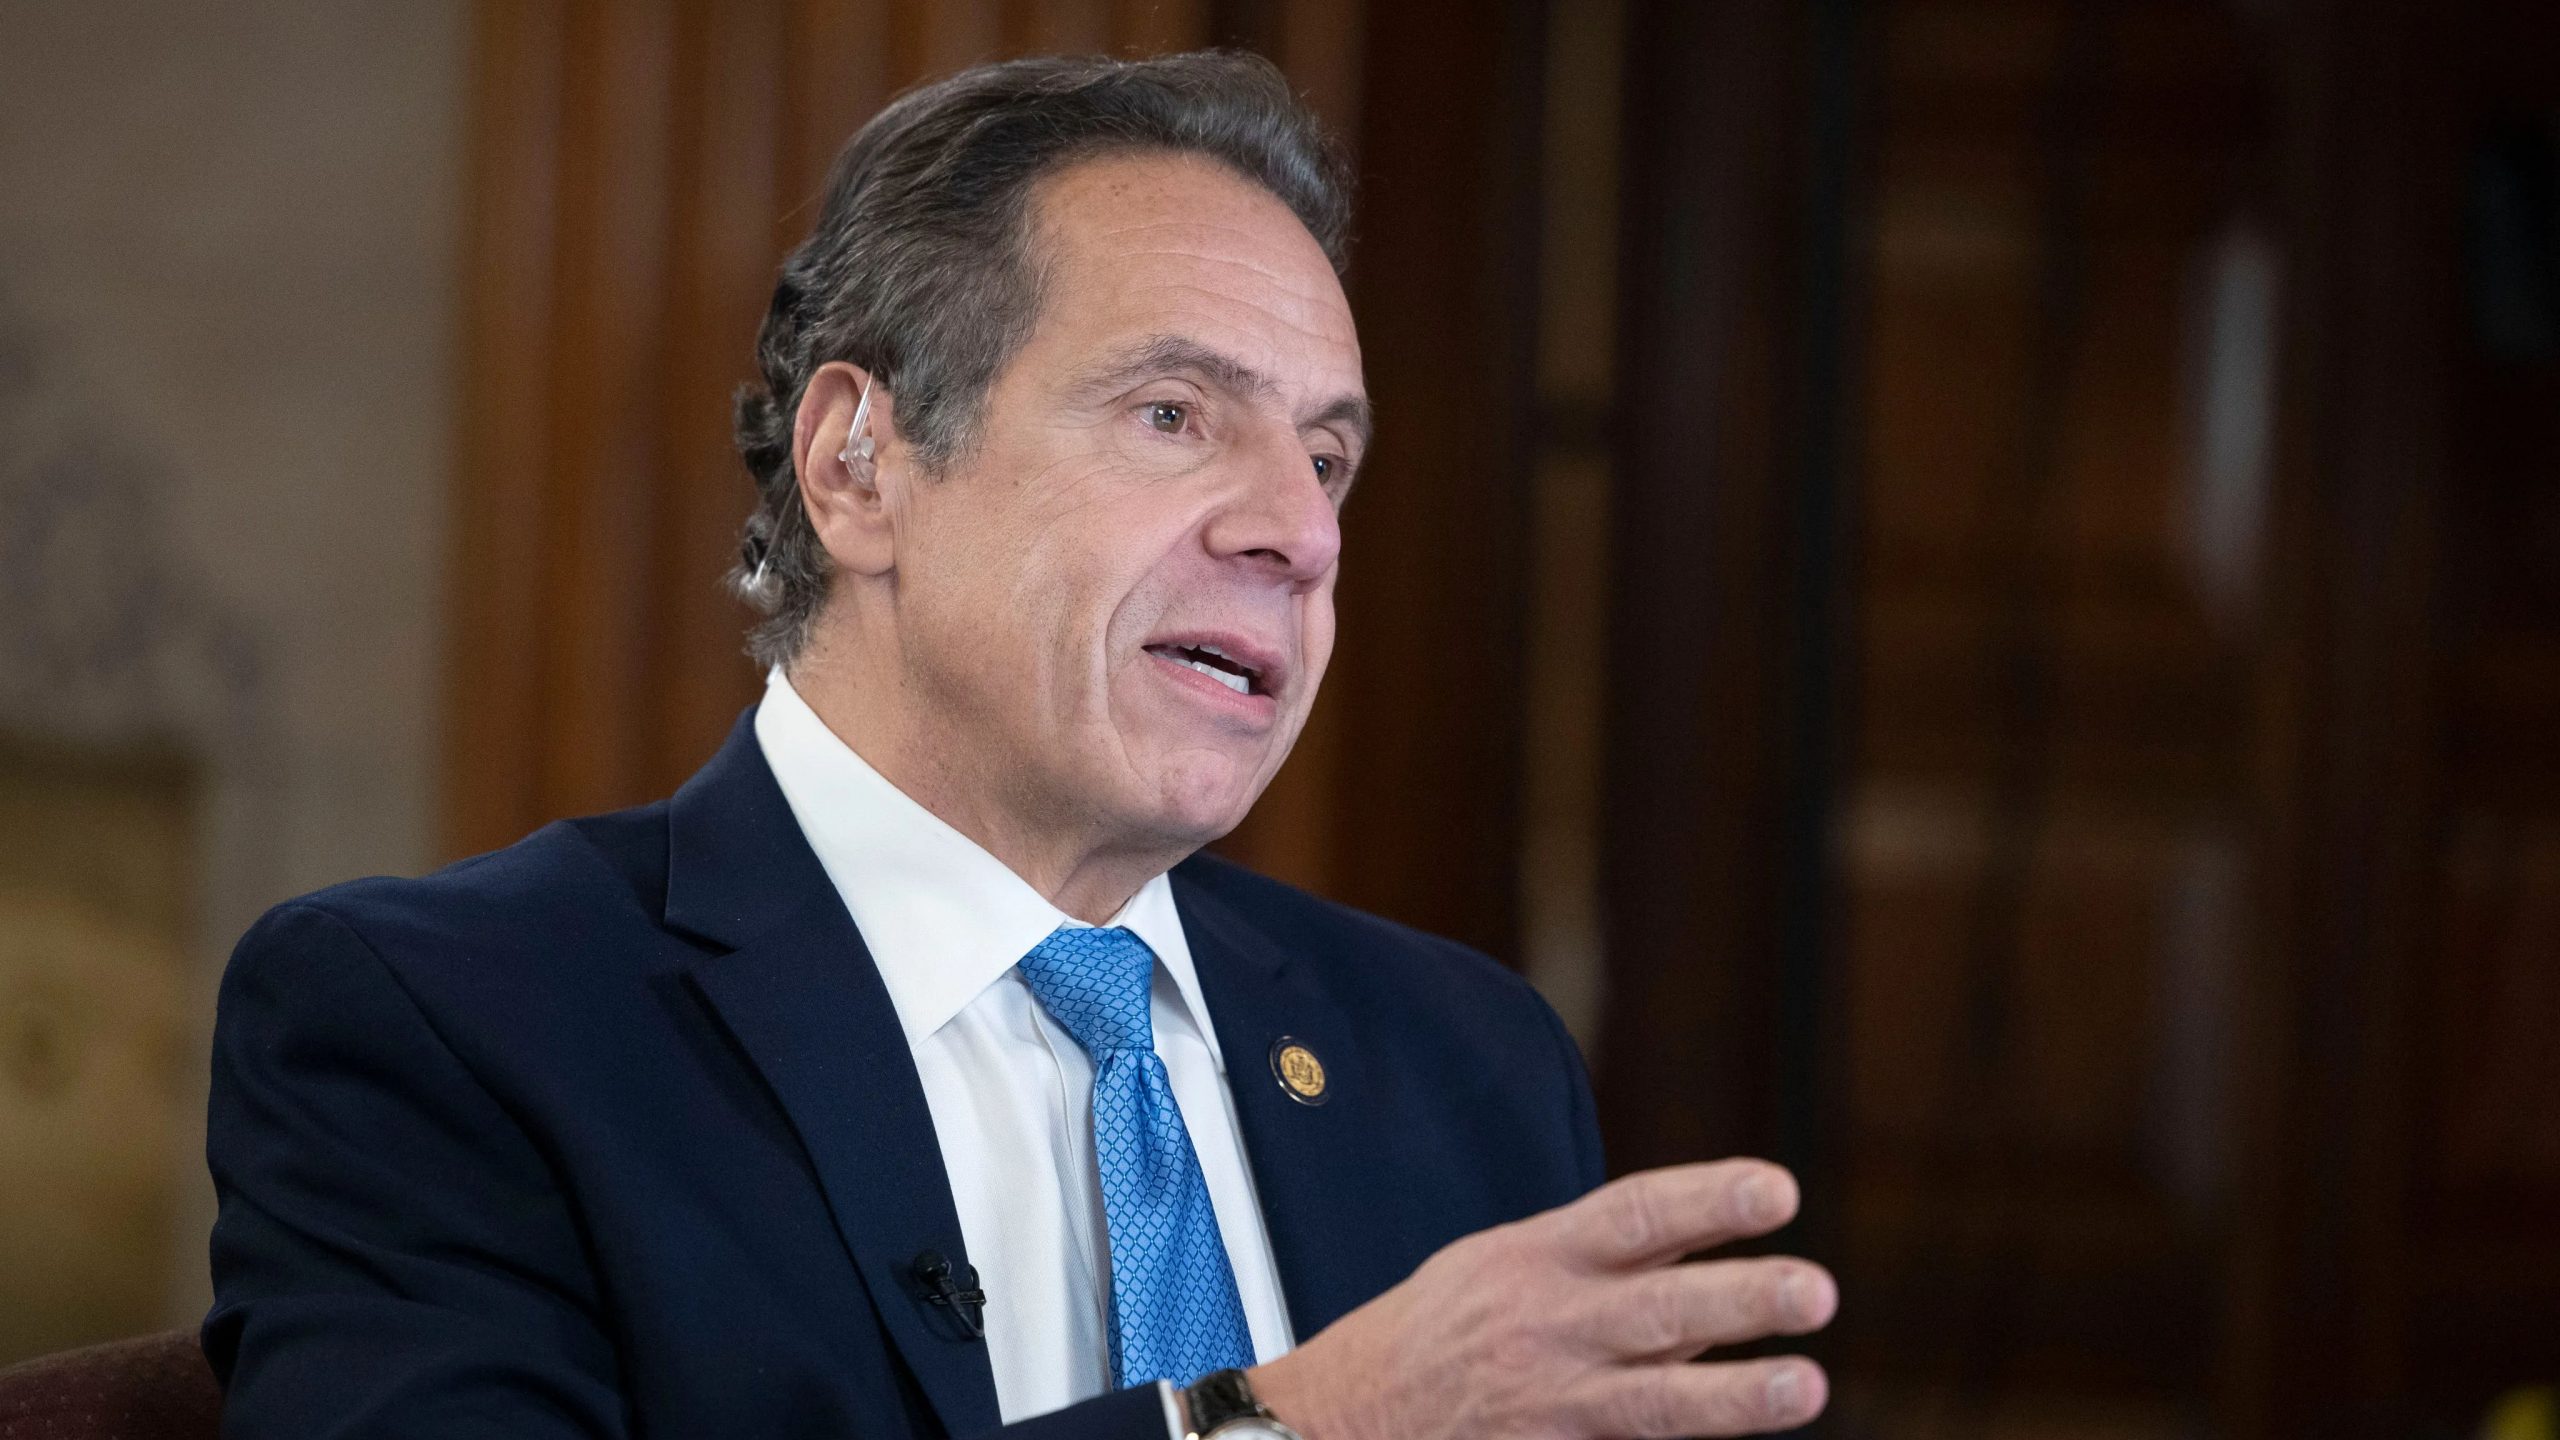 Andrew Cuomo faces harassment allegations from sixth woman: Reports